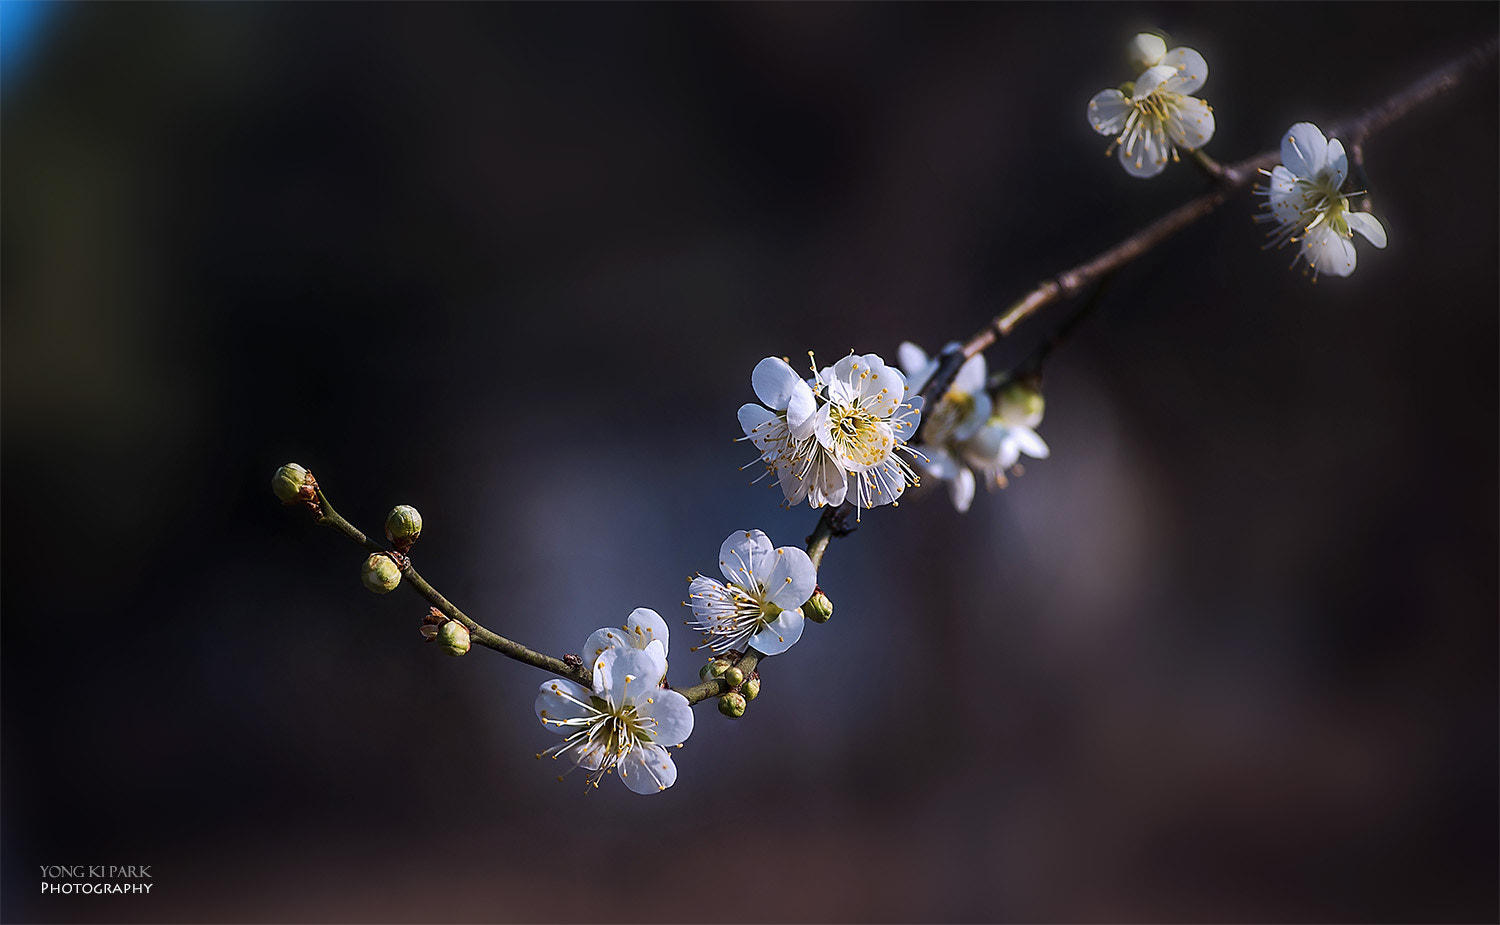 Pentax K-1 sample photo. Opening of the spring-5 photography